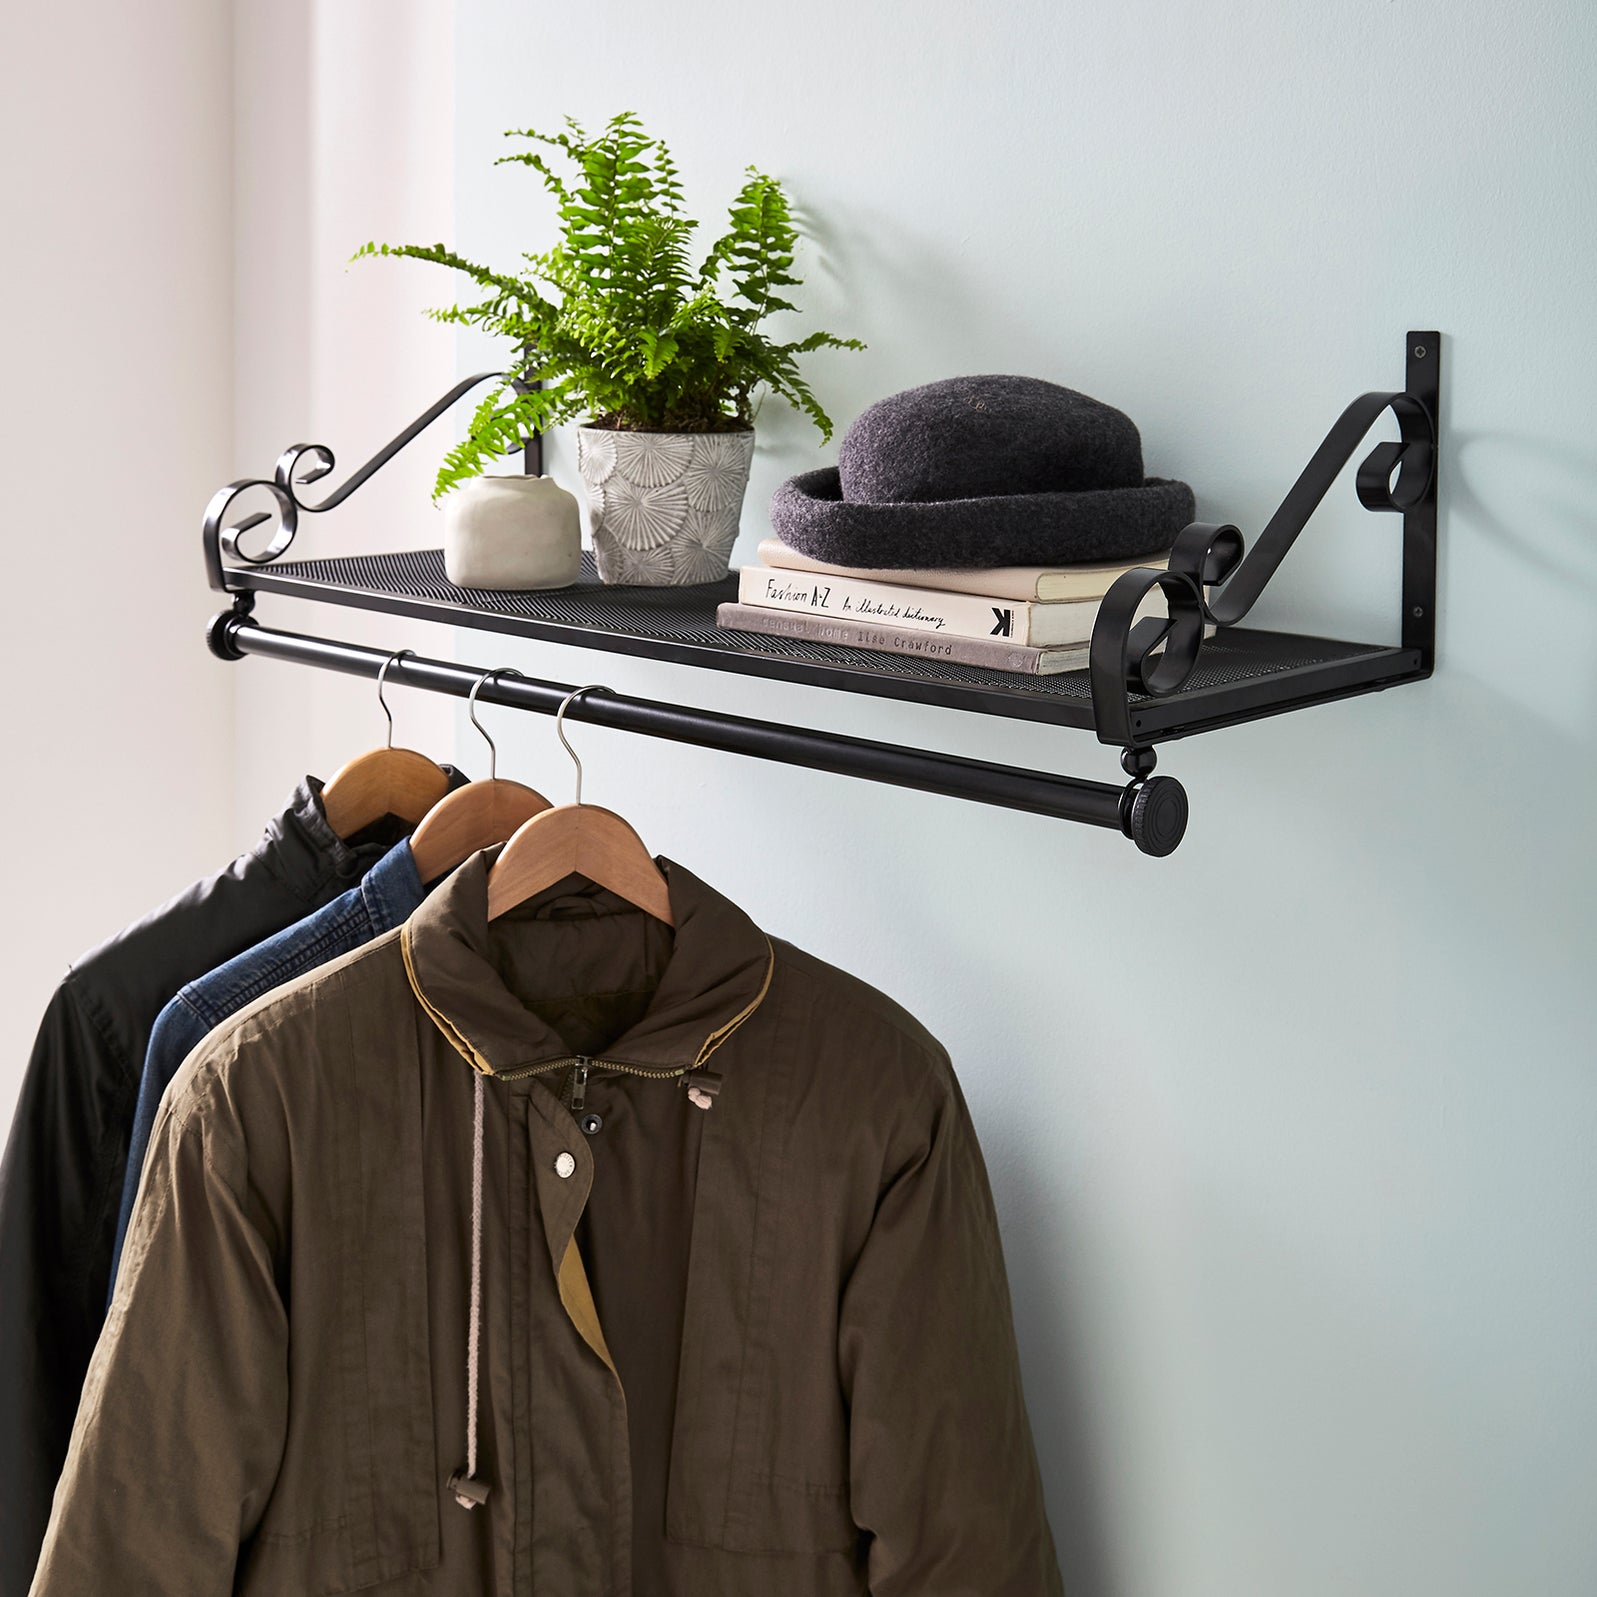 Clothes Rails - Wall Mounted or Freestanding - House of Home